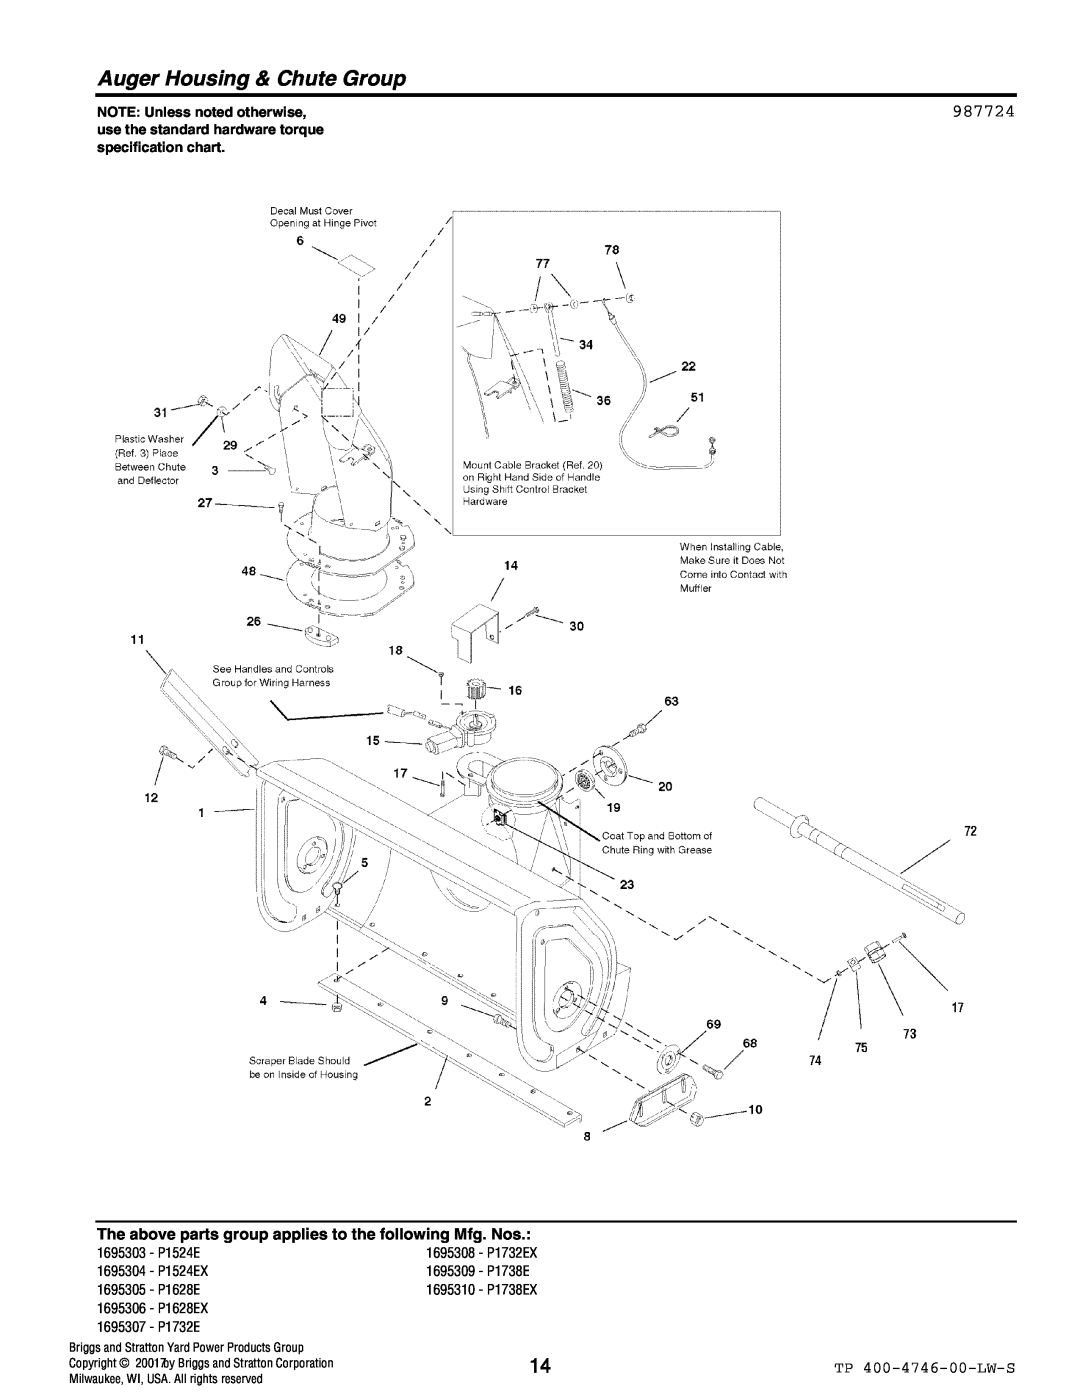 Simplicity 1695304, 1695310, 1695305, 1695309, 1695307 manual Auger Housing & Chute Group, 987724, NOTE Unless noted otherwise 